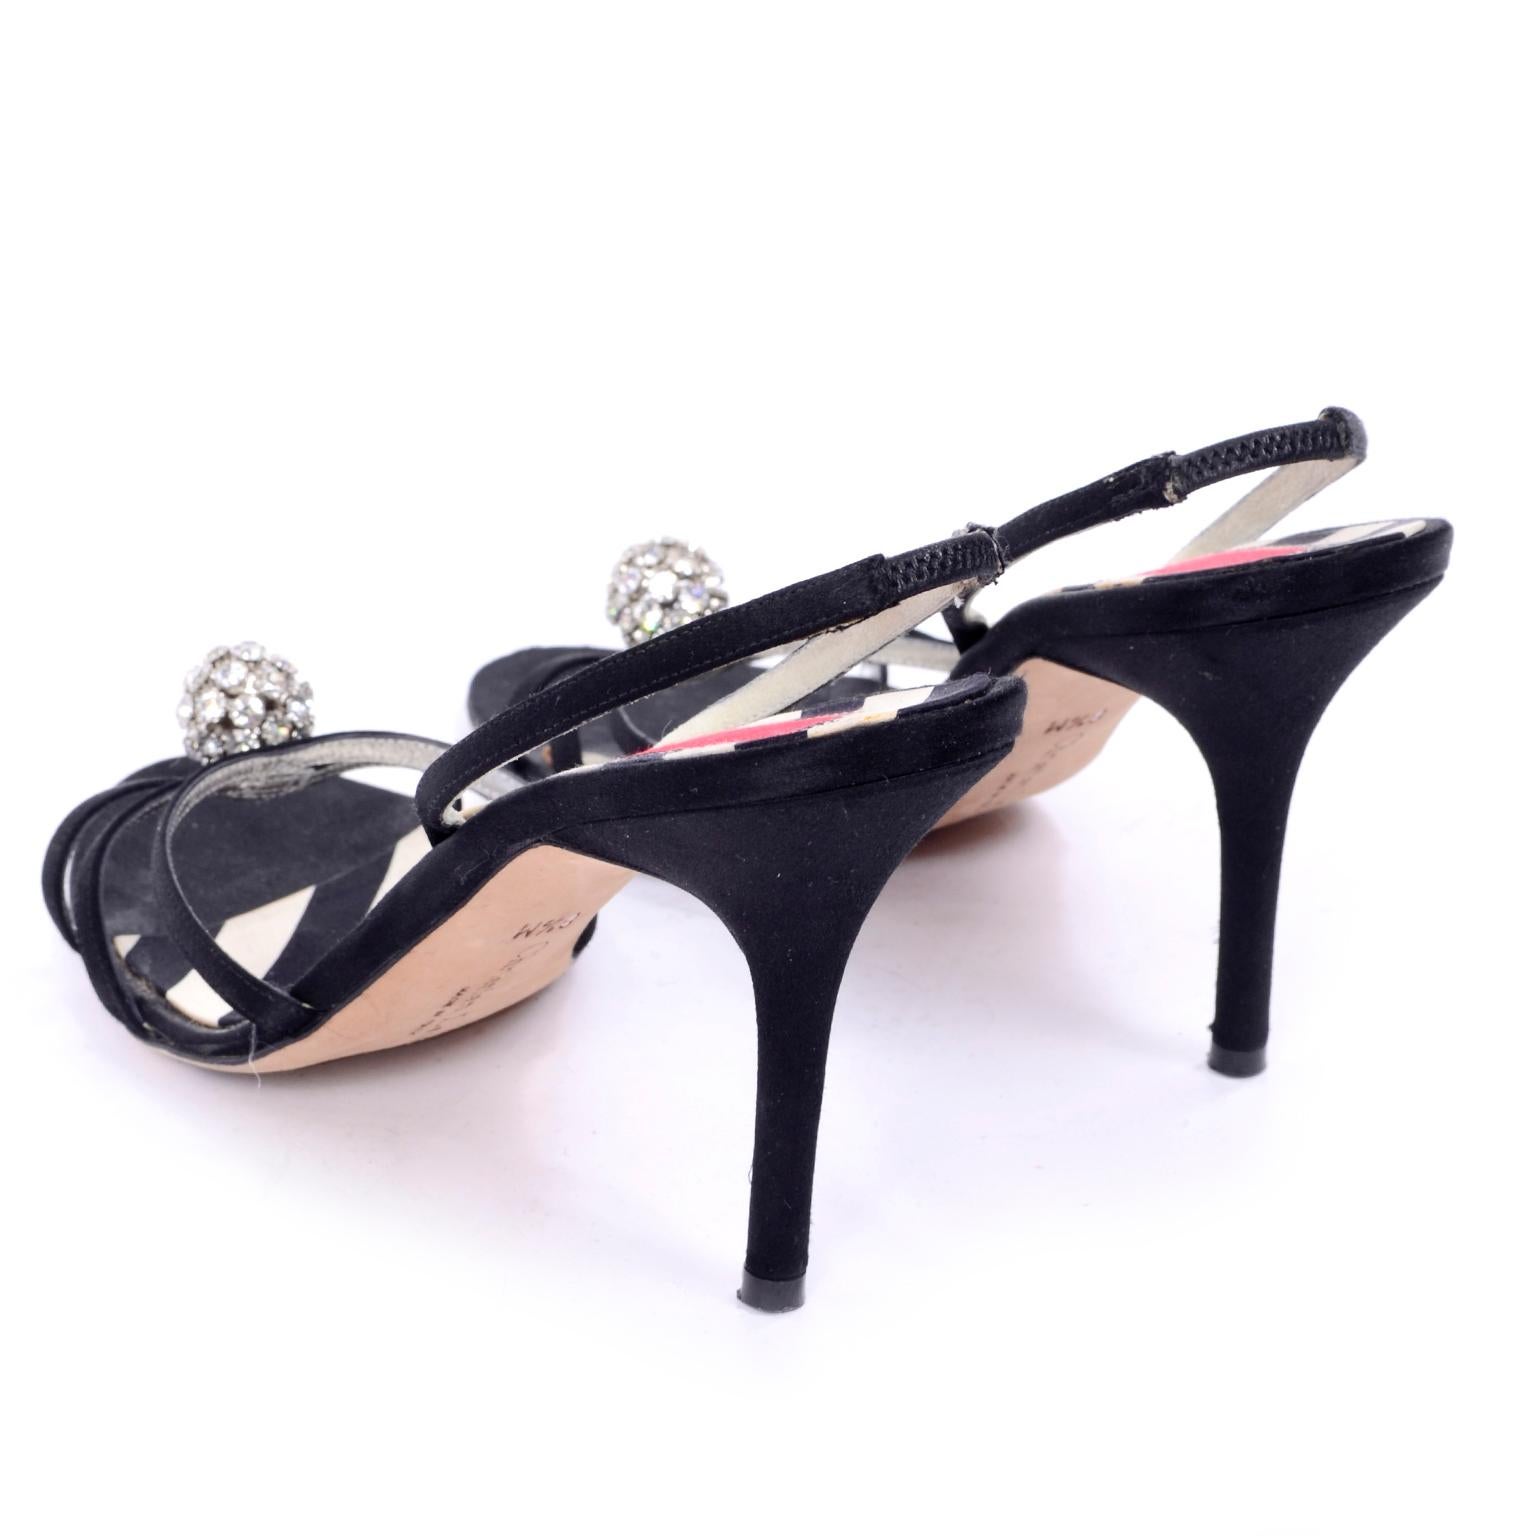 Christian Lacroix Vintage Black Heels Slingback Strappy Shoes W/ Rhinestones 8.5 In Good Condition For Sale In Portland, OR